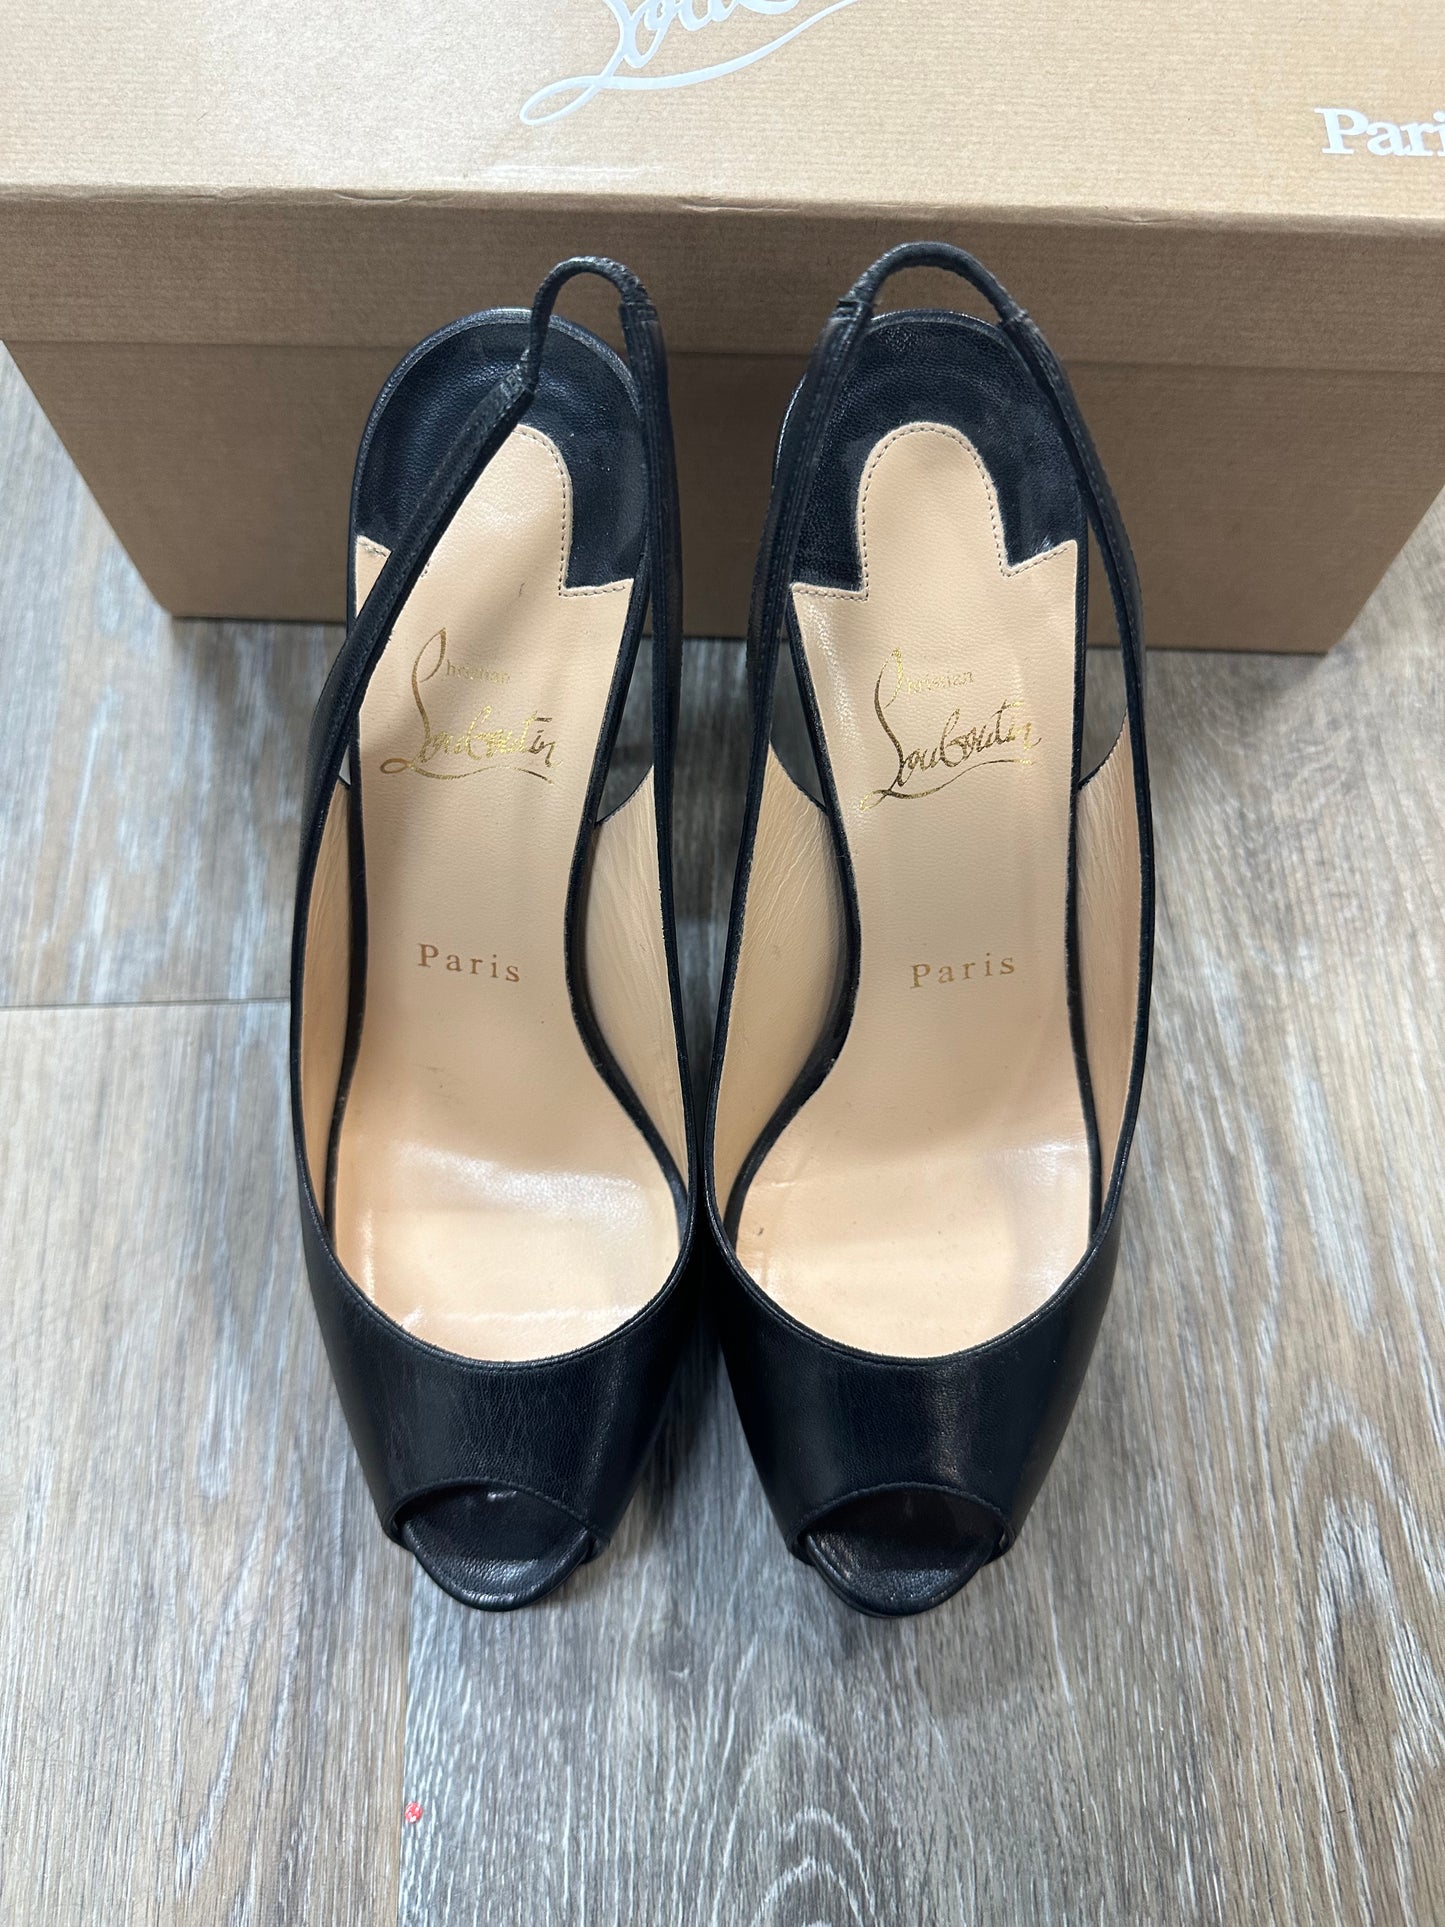 Shoes Luxury Designer By Christian Louboutin  Size: 8